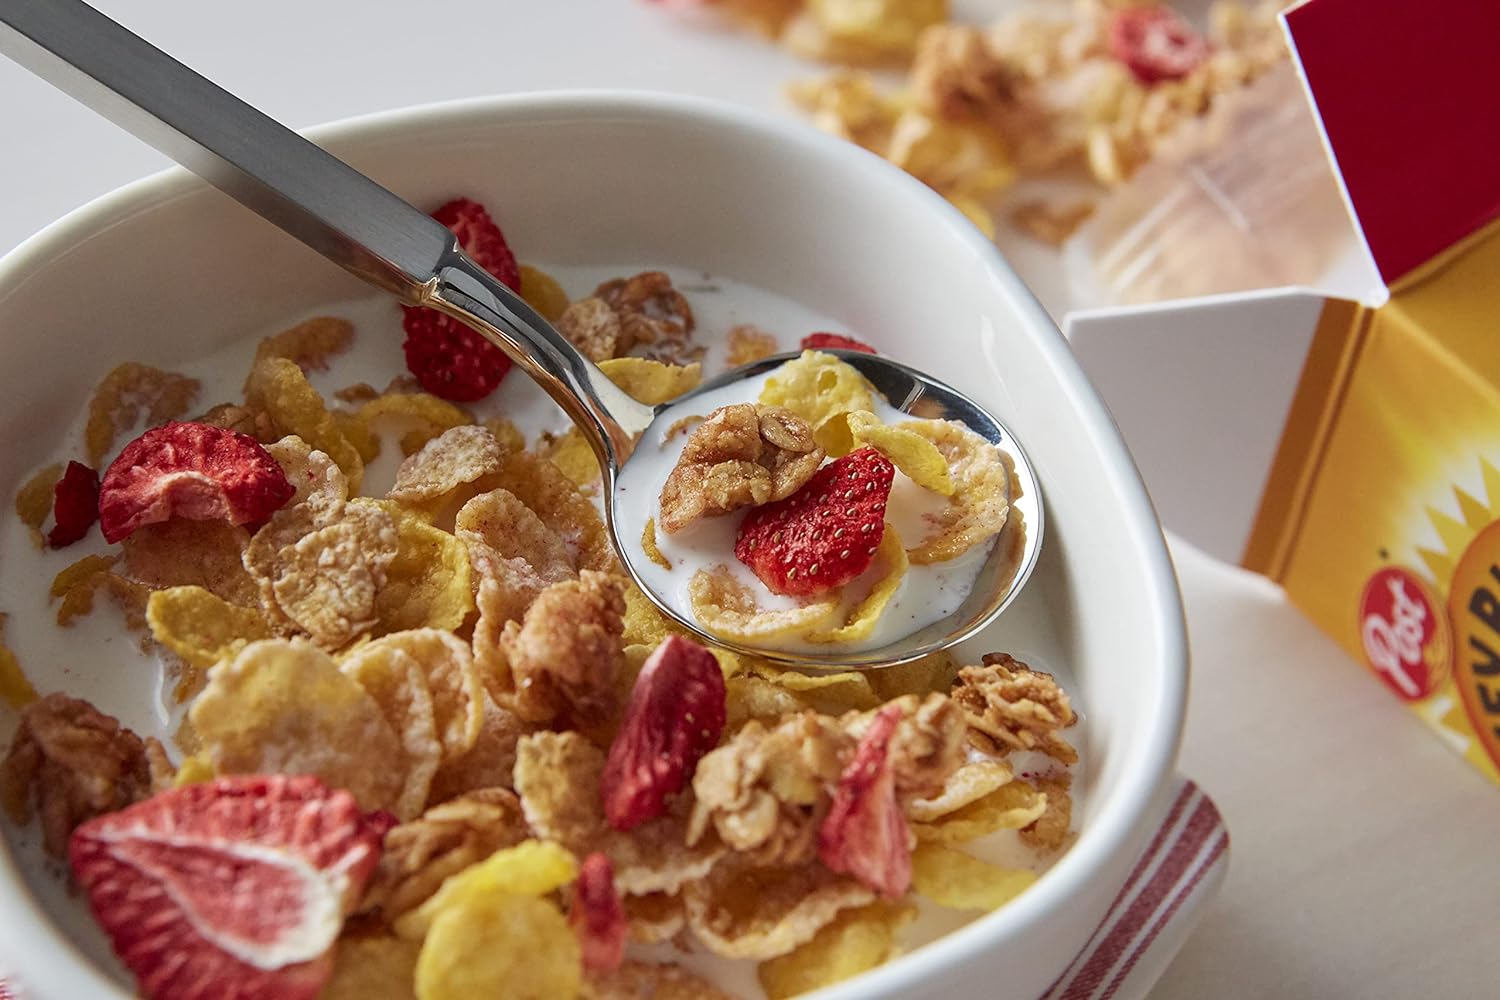 Post Honey Bunches of Oats with Strawberries Breakfast Cereal, Honey Oats and Strawberry Cereal, 11 OZ Box